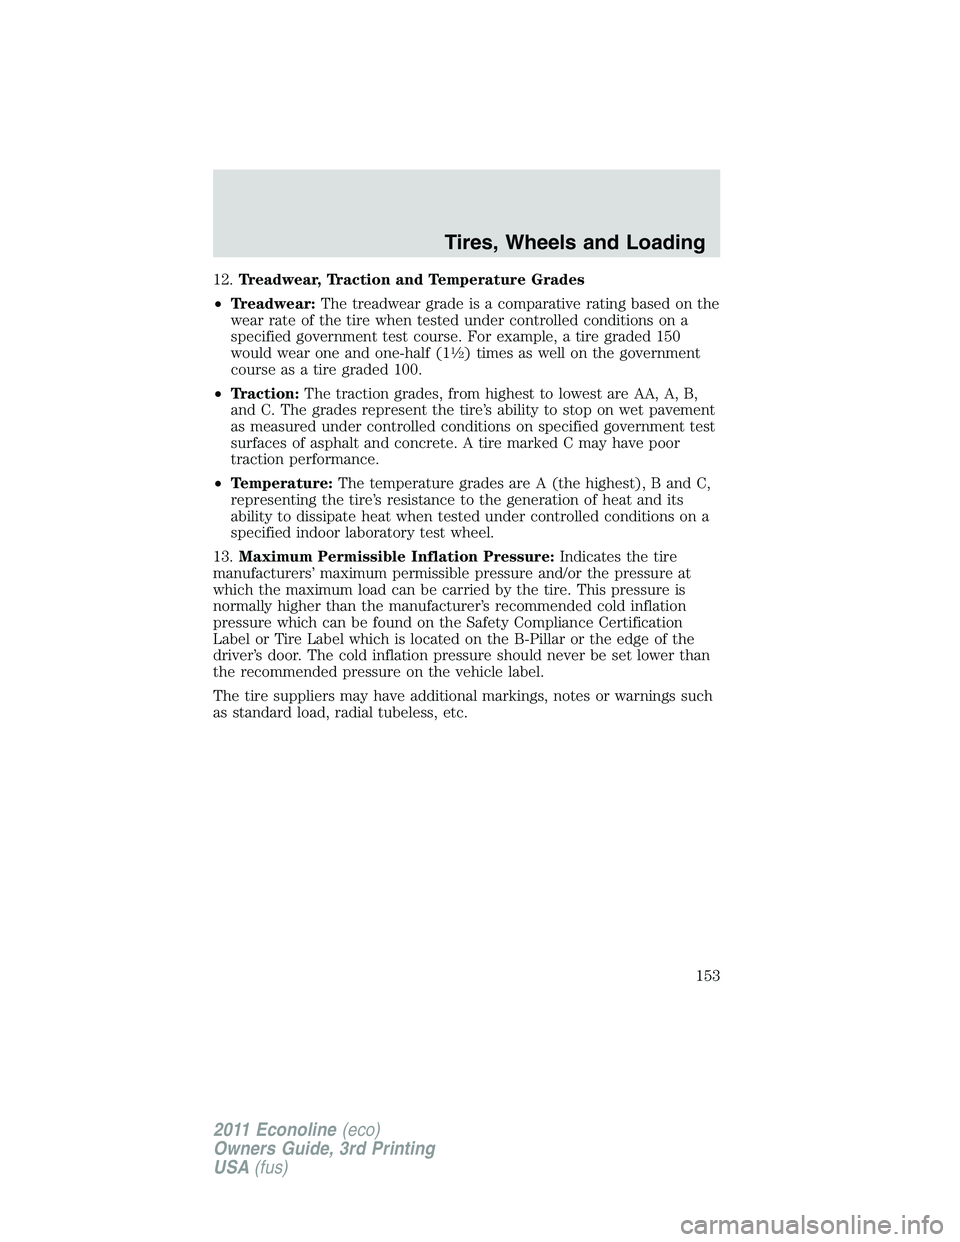 FORD E350 2011 Owners Manual 12.Treadwear, Traction and Temperature Grades
•Treadwear:The treadwear grade is a comparative rating based on the
wear rate of the tire when tested under controlled conditions on a
specified governm